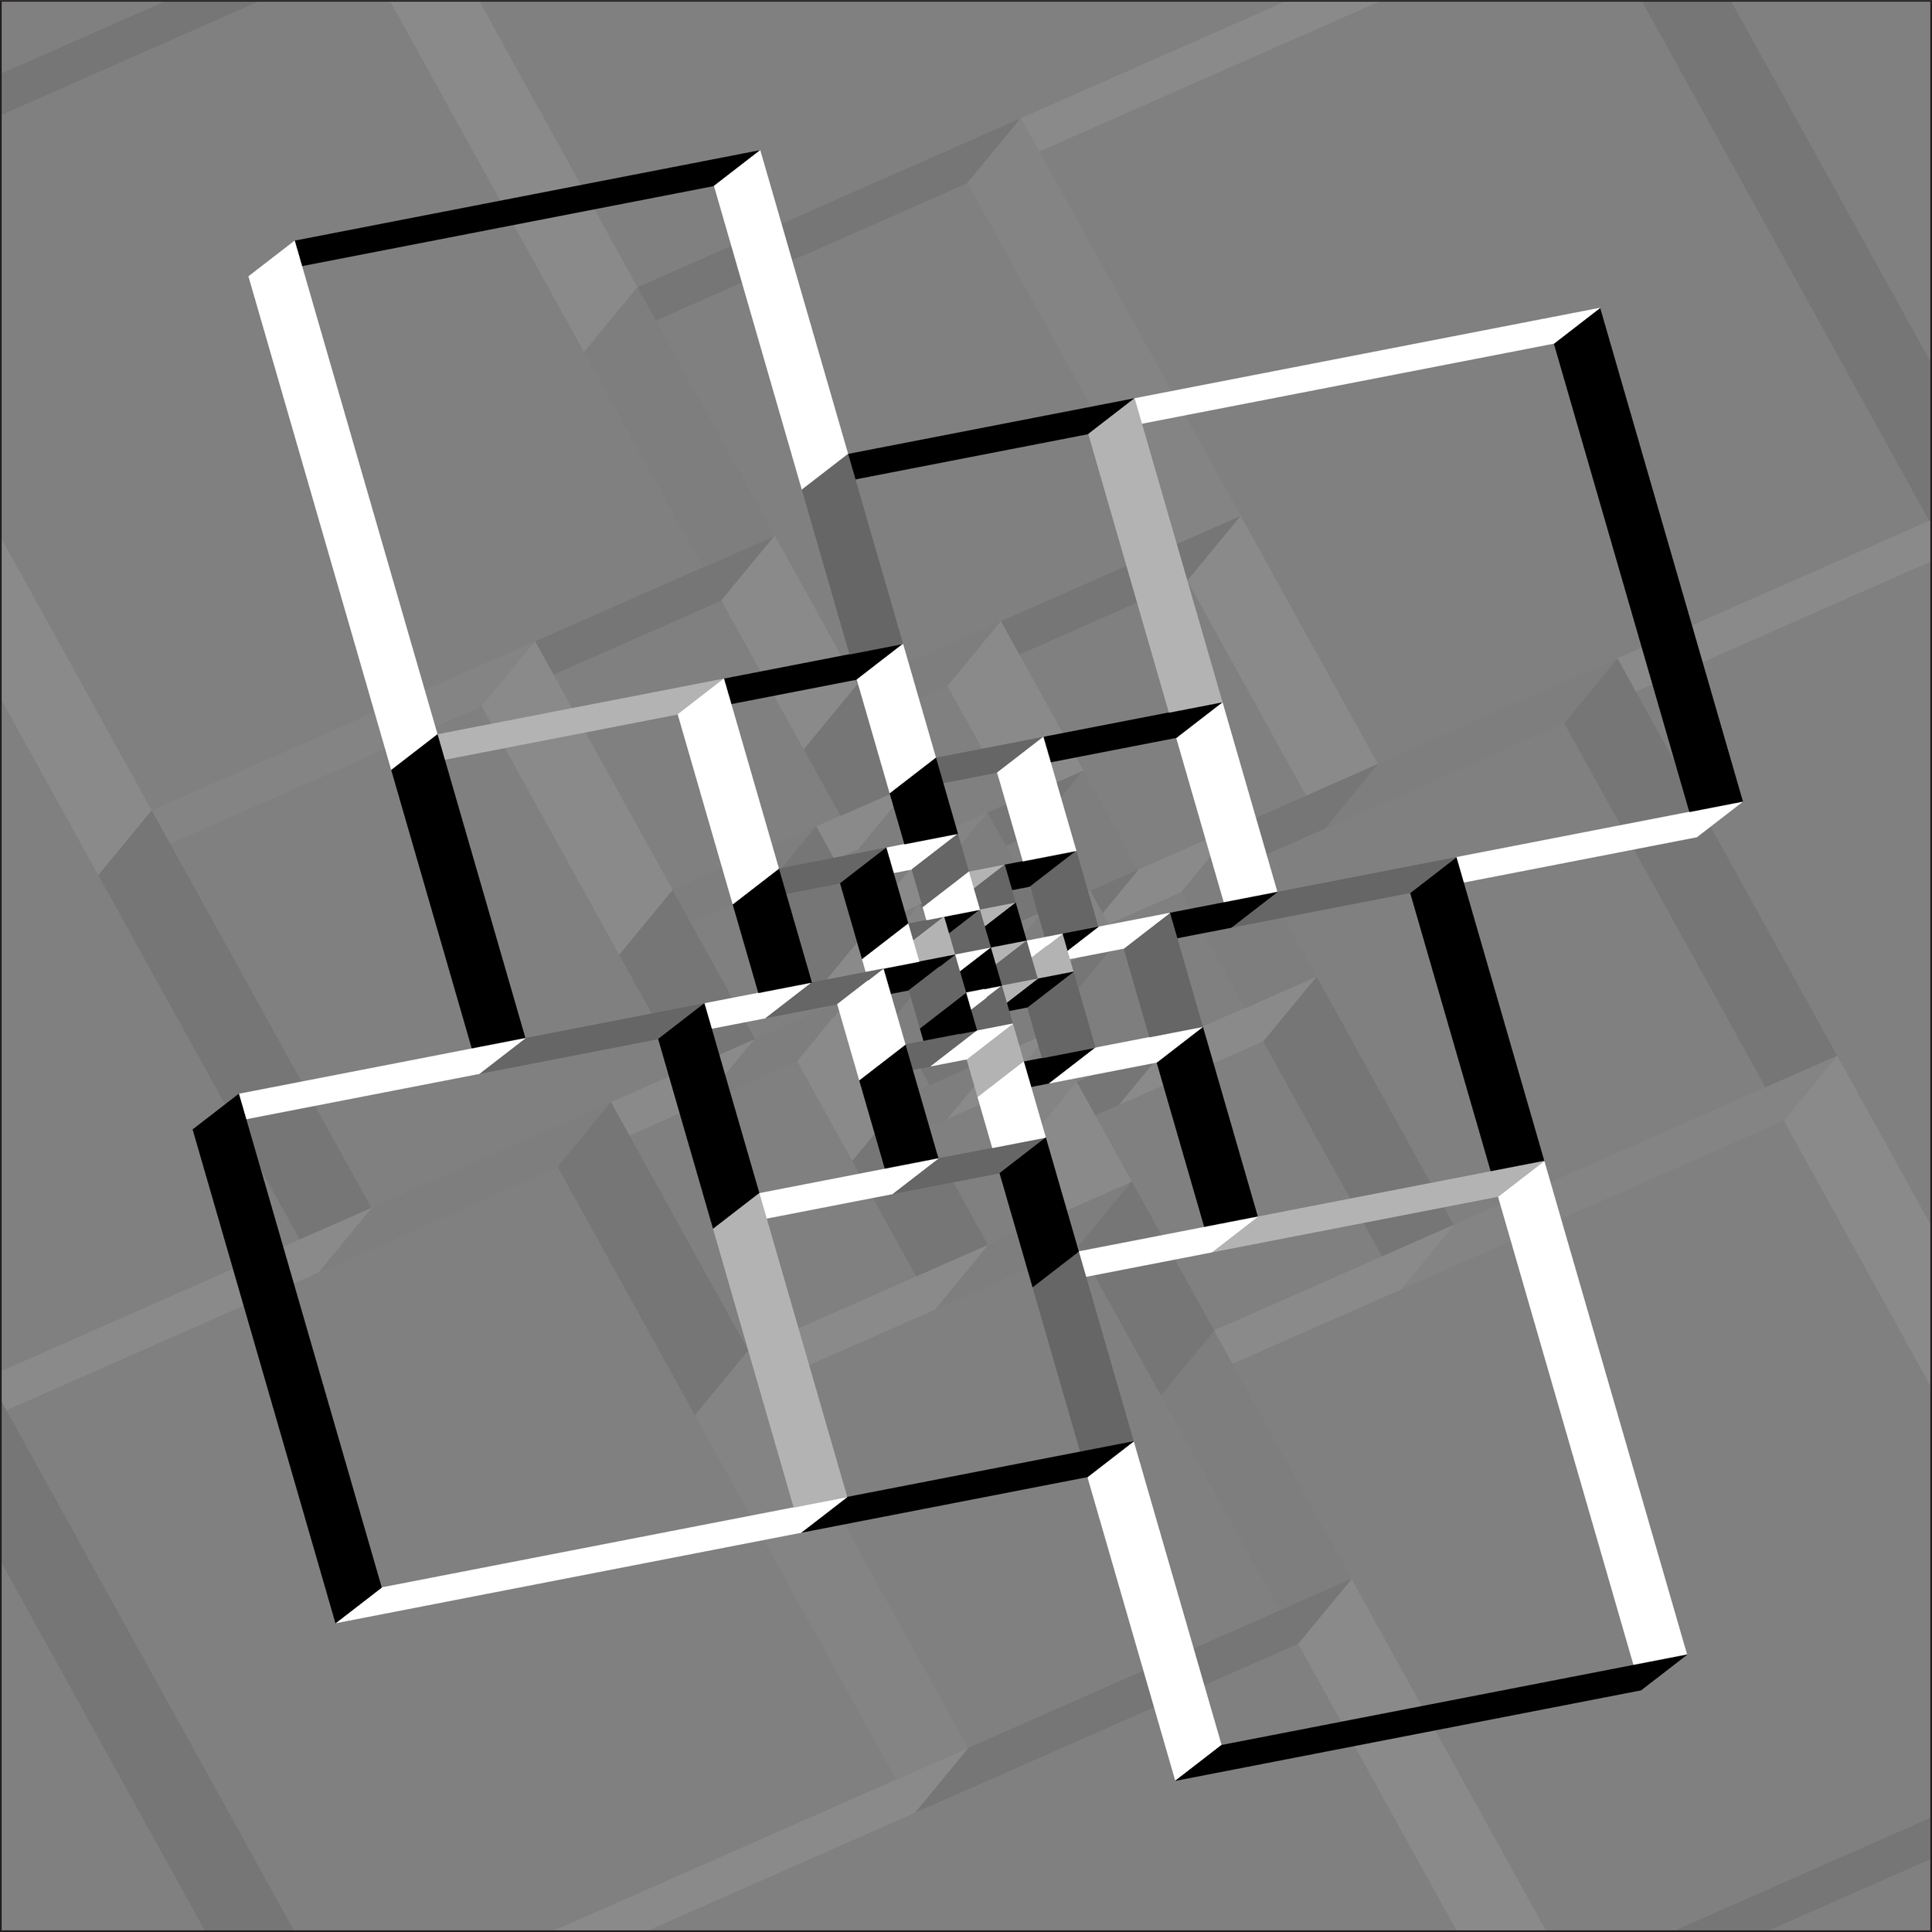 20201025_spiral-square-raster_in-42x42u_out-48x48_16x16_space_grbw-1.png